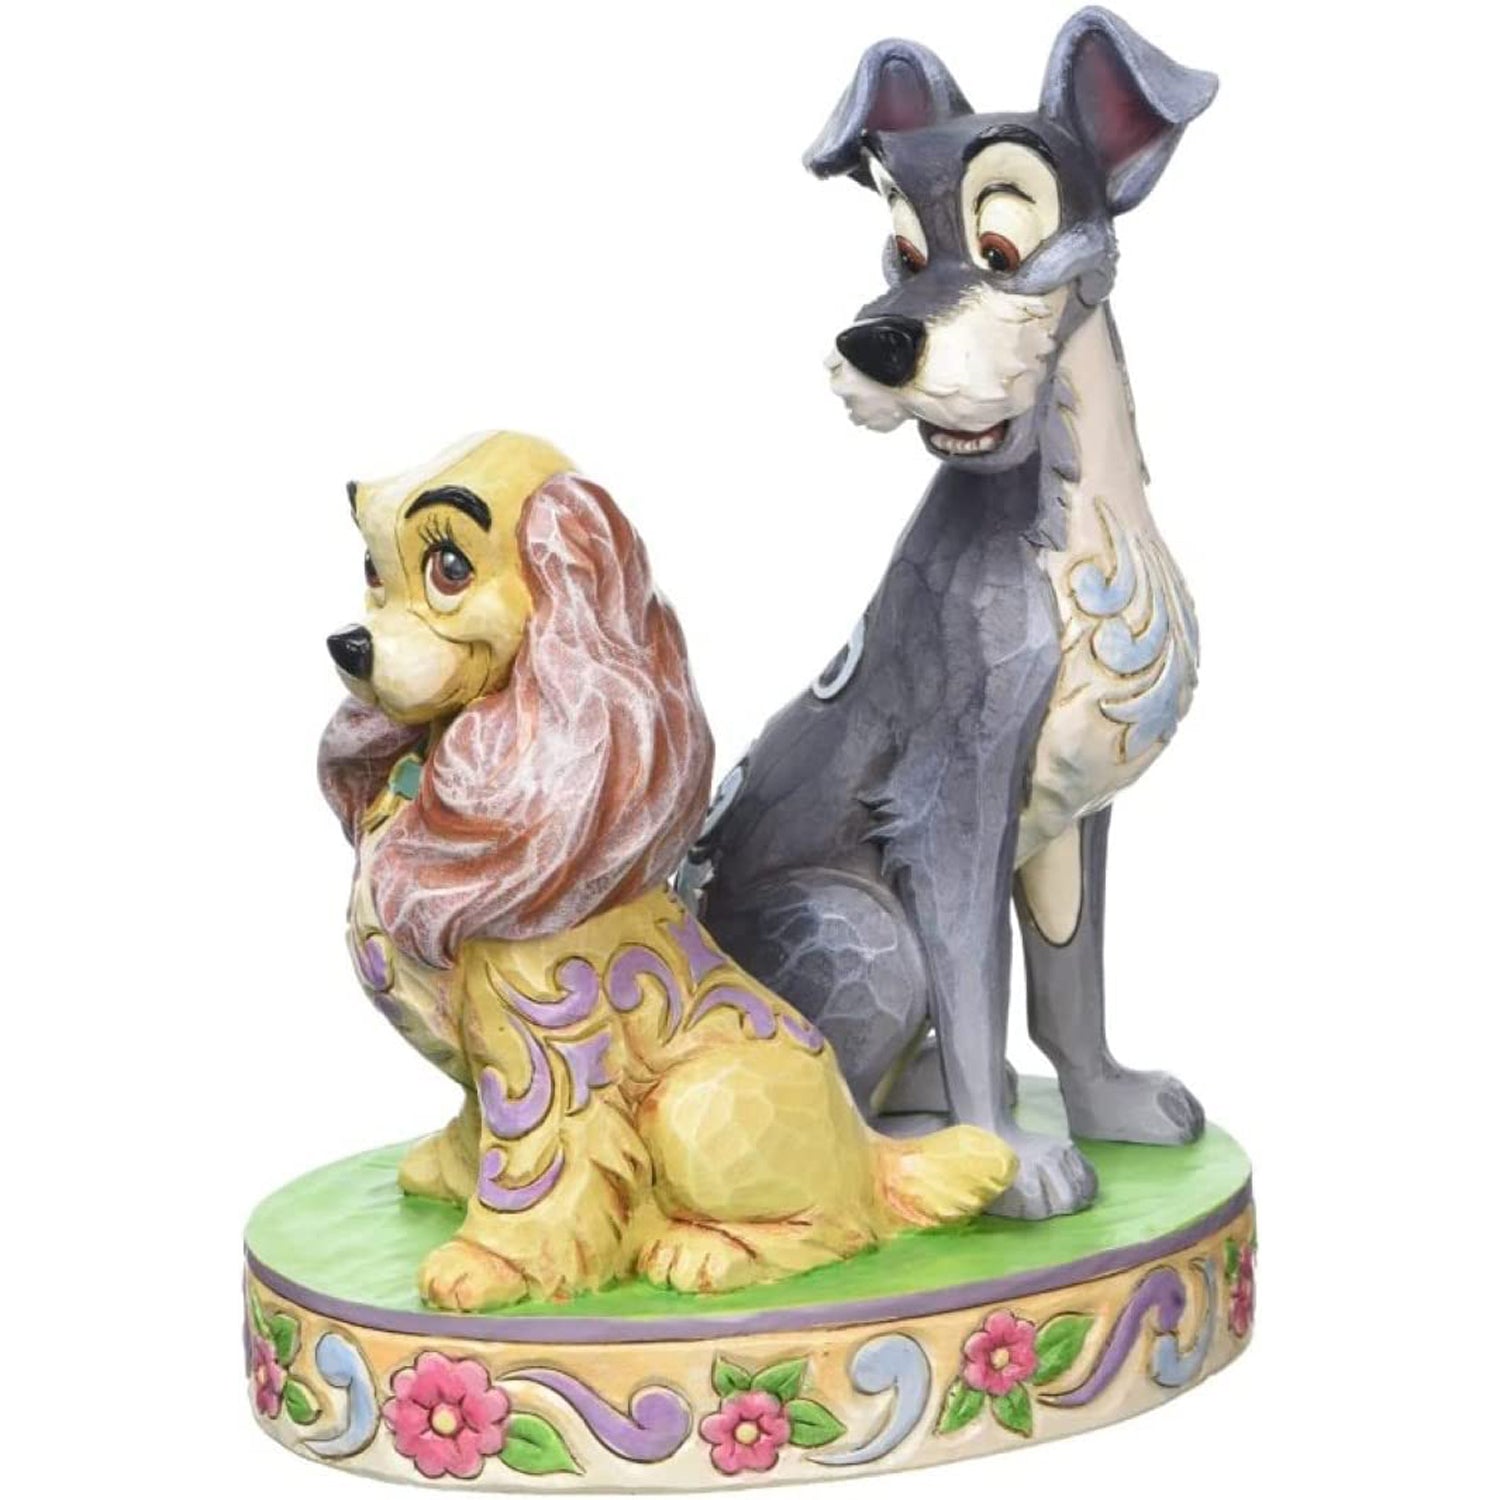 Lady and the Tramp figurine - Disney